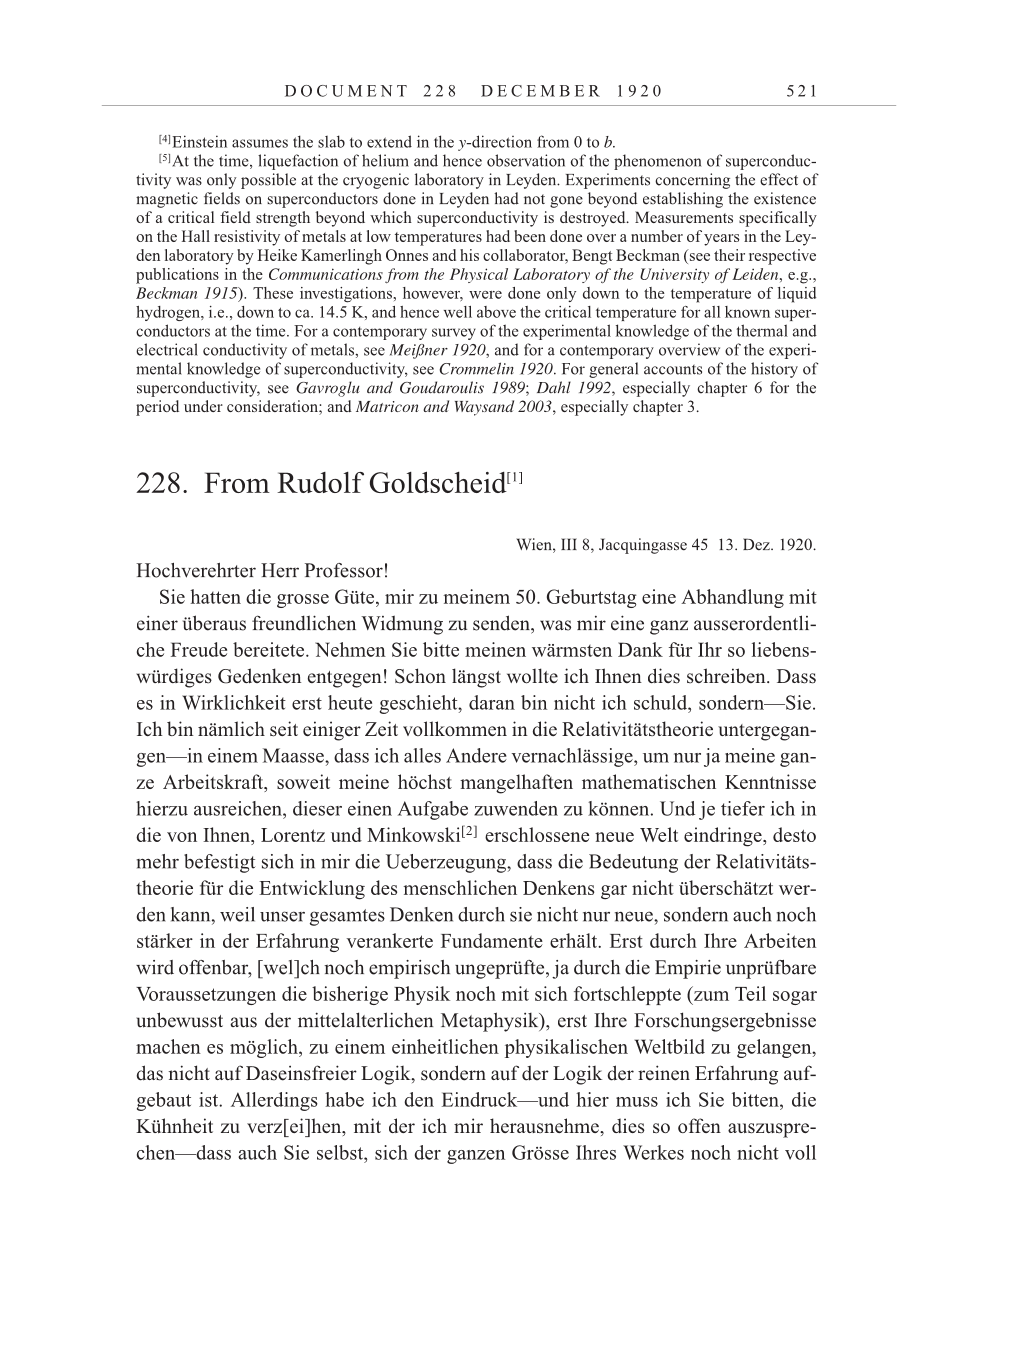 Volume 10: The Berlin Years: Correspondence May-December 1920 / Supplementary Correspondence 1909-1920 page 521